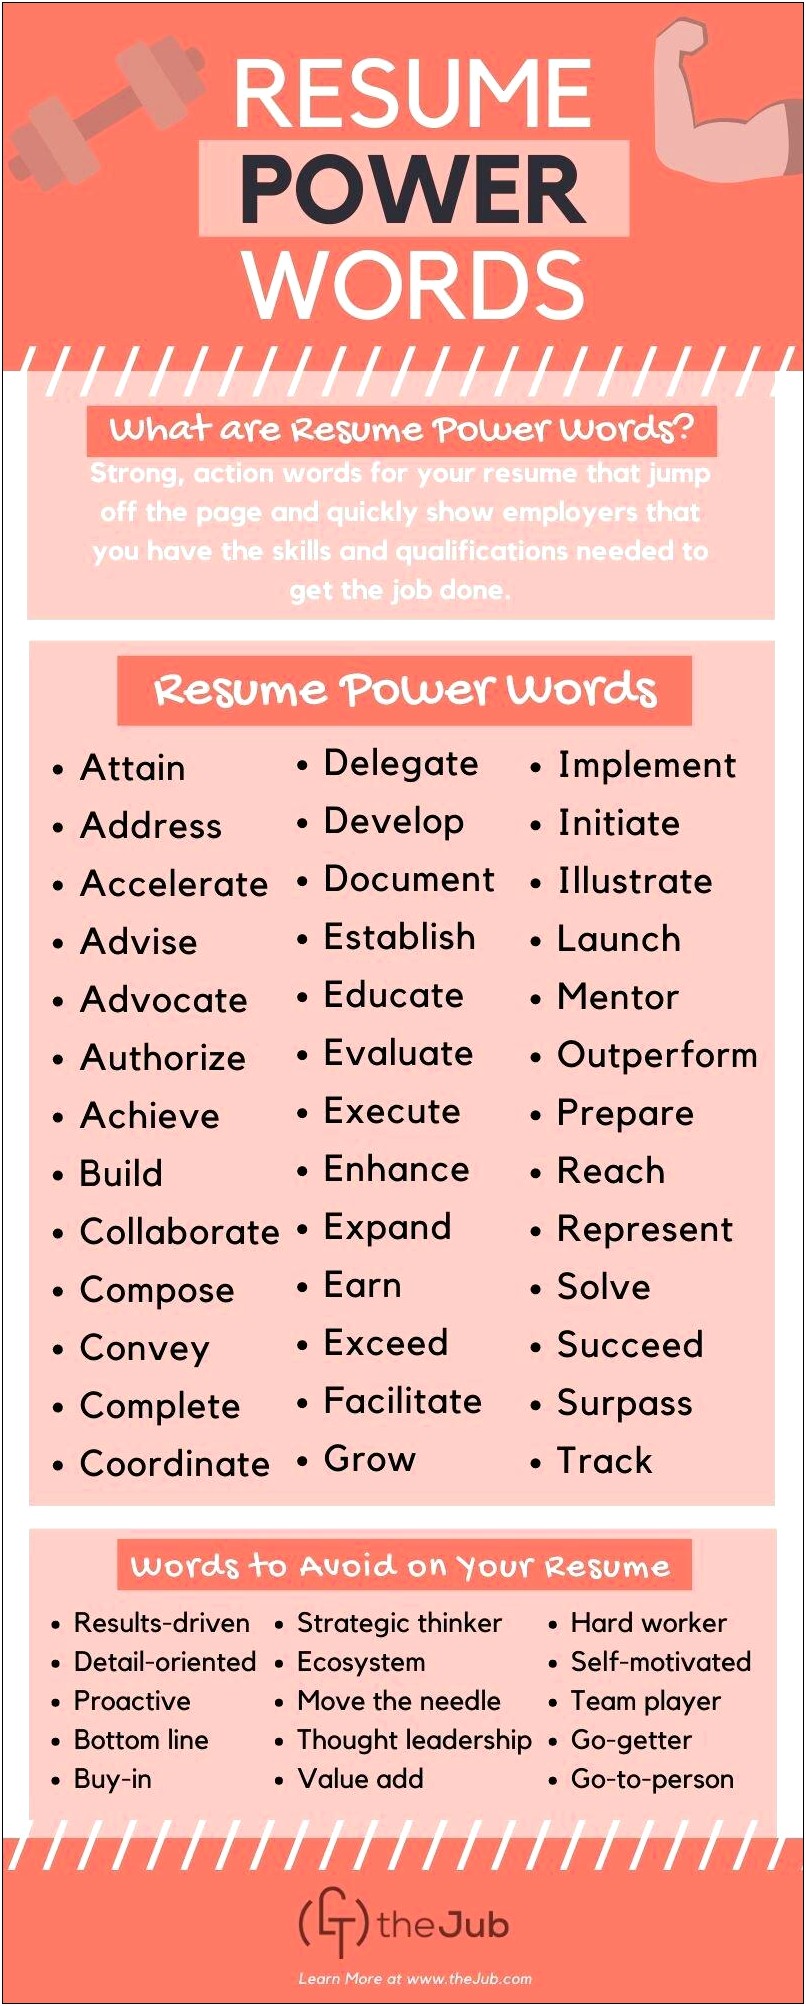 Resume Words That Are Not Overused